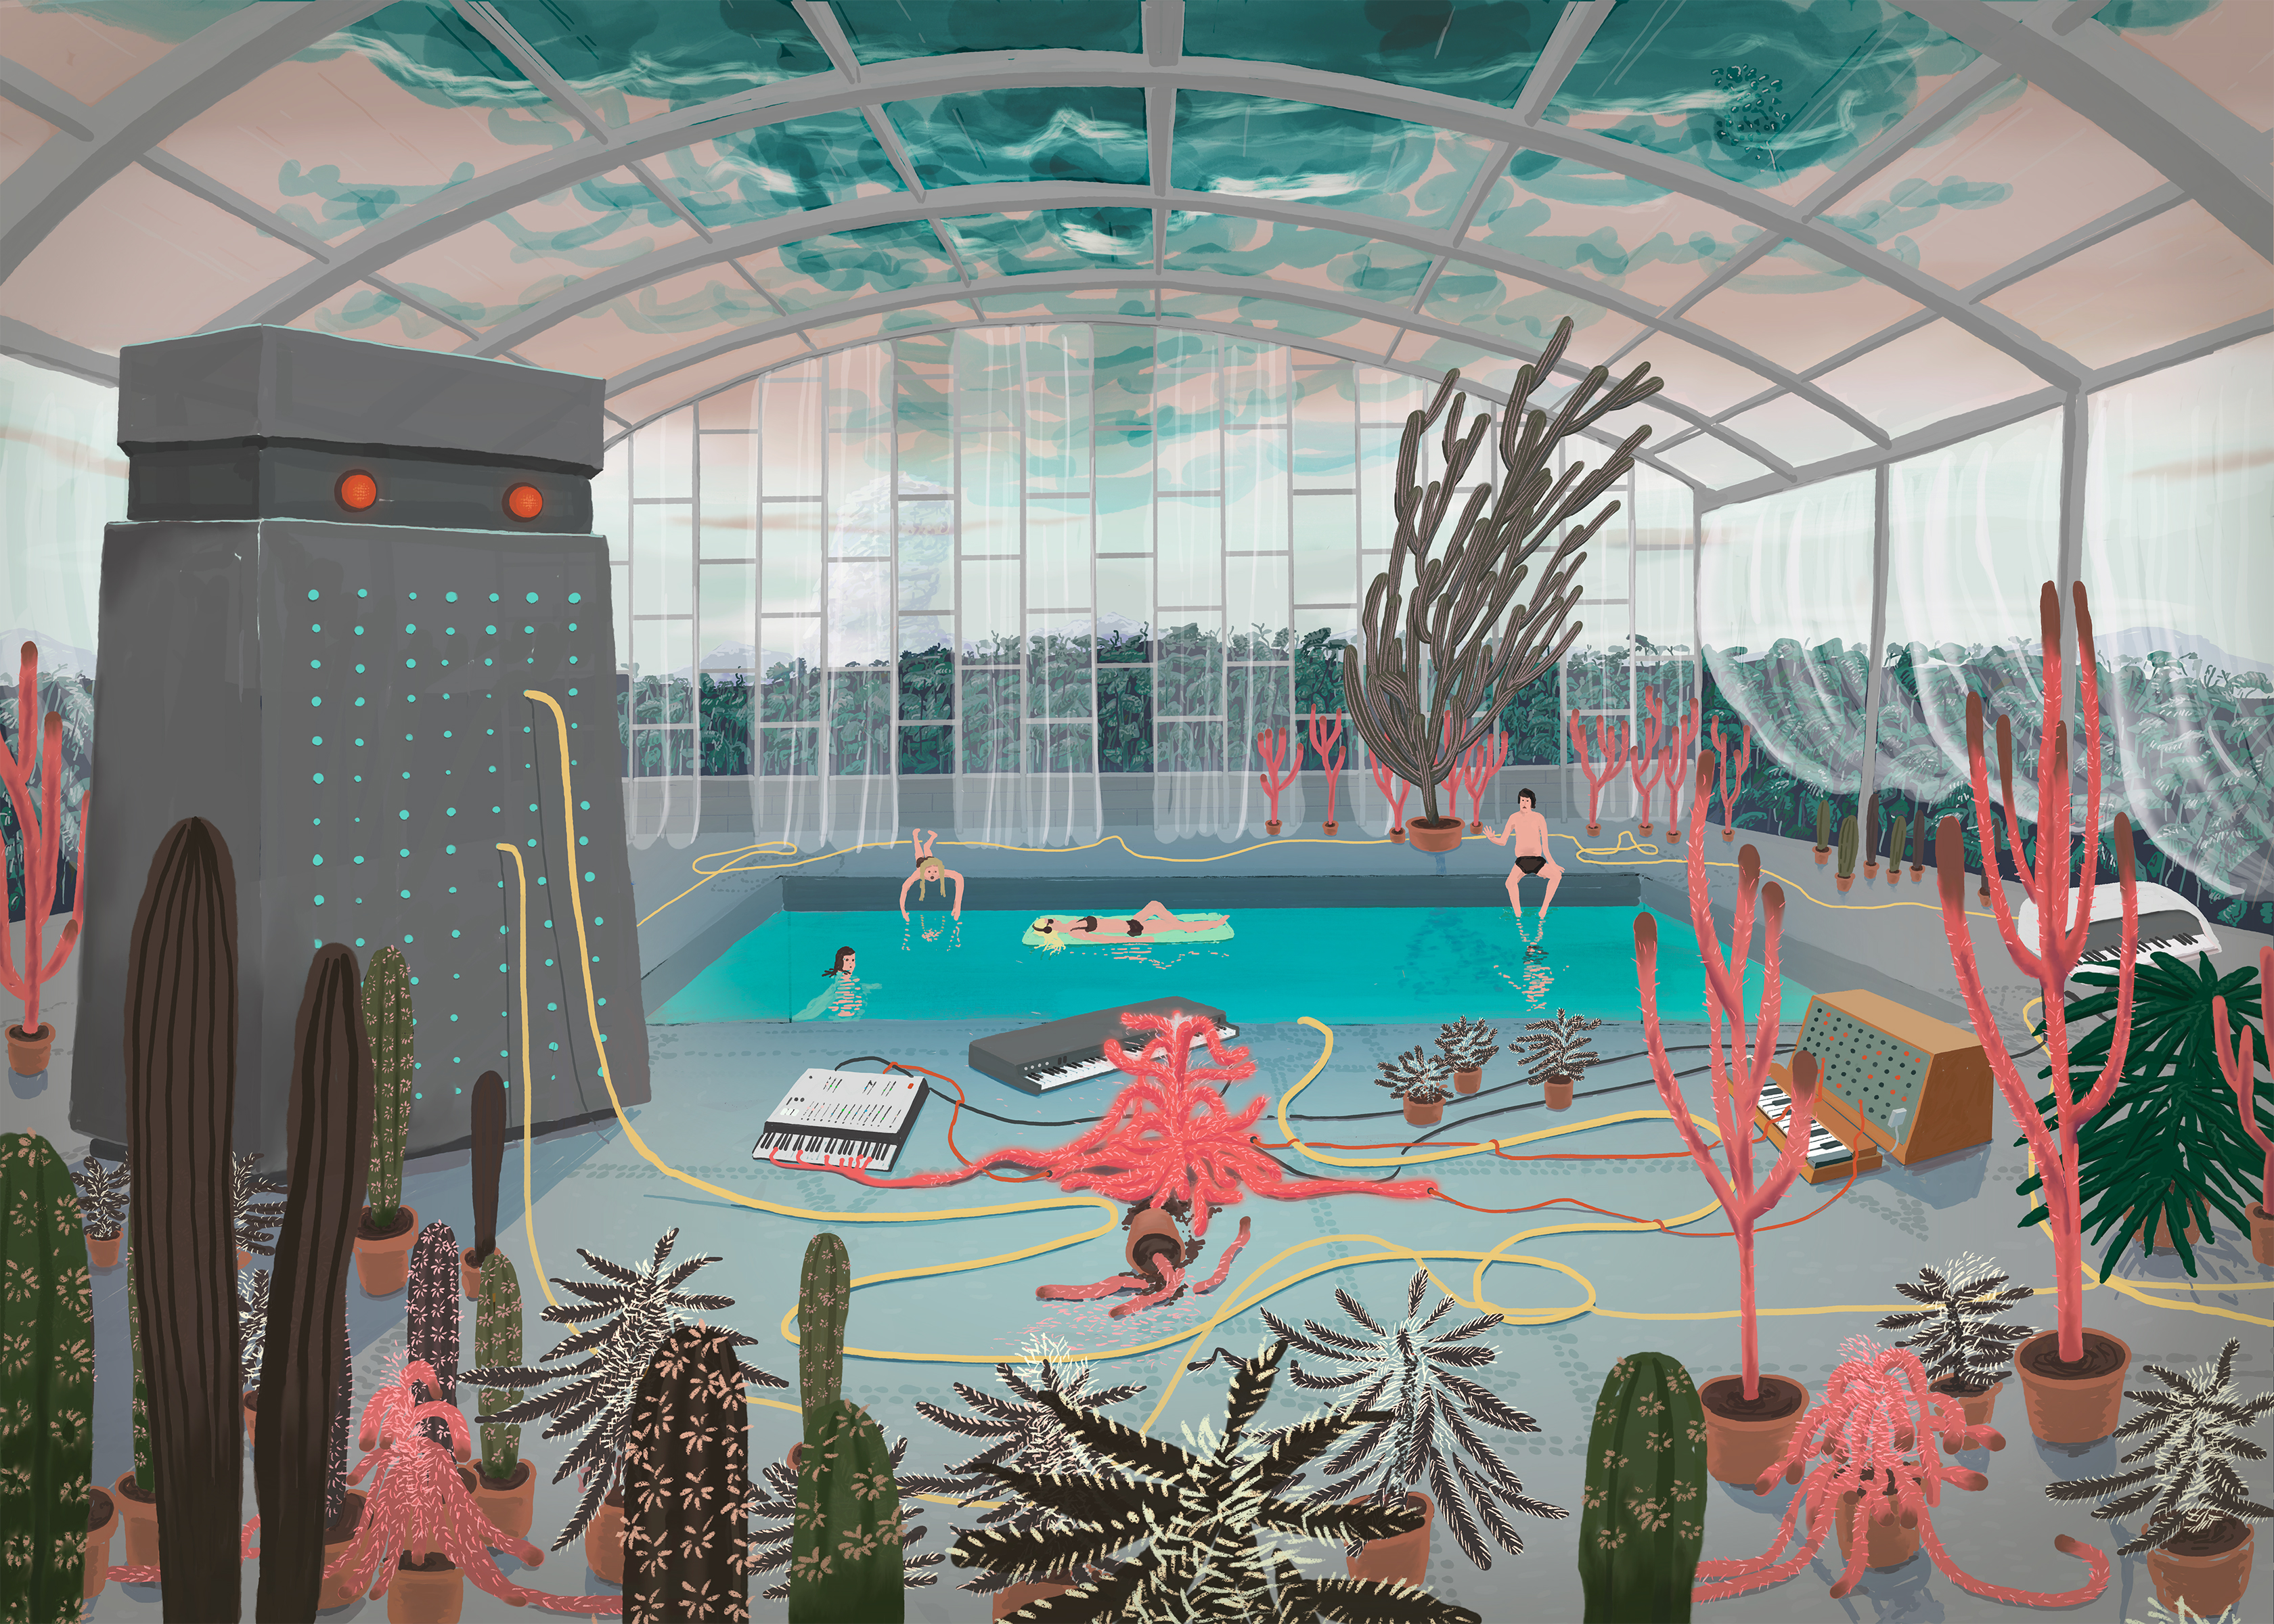 Colourful illustration depicting people hanging out at pool with synths and cactuses.